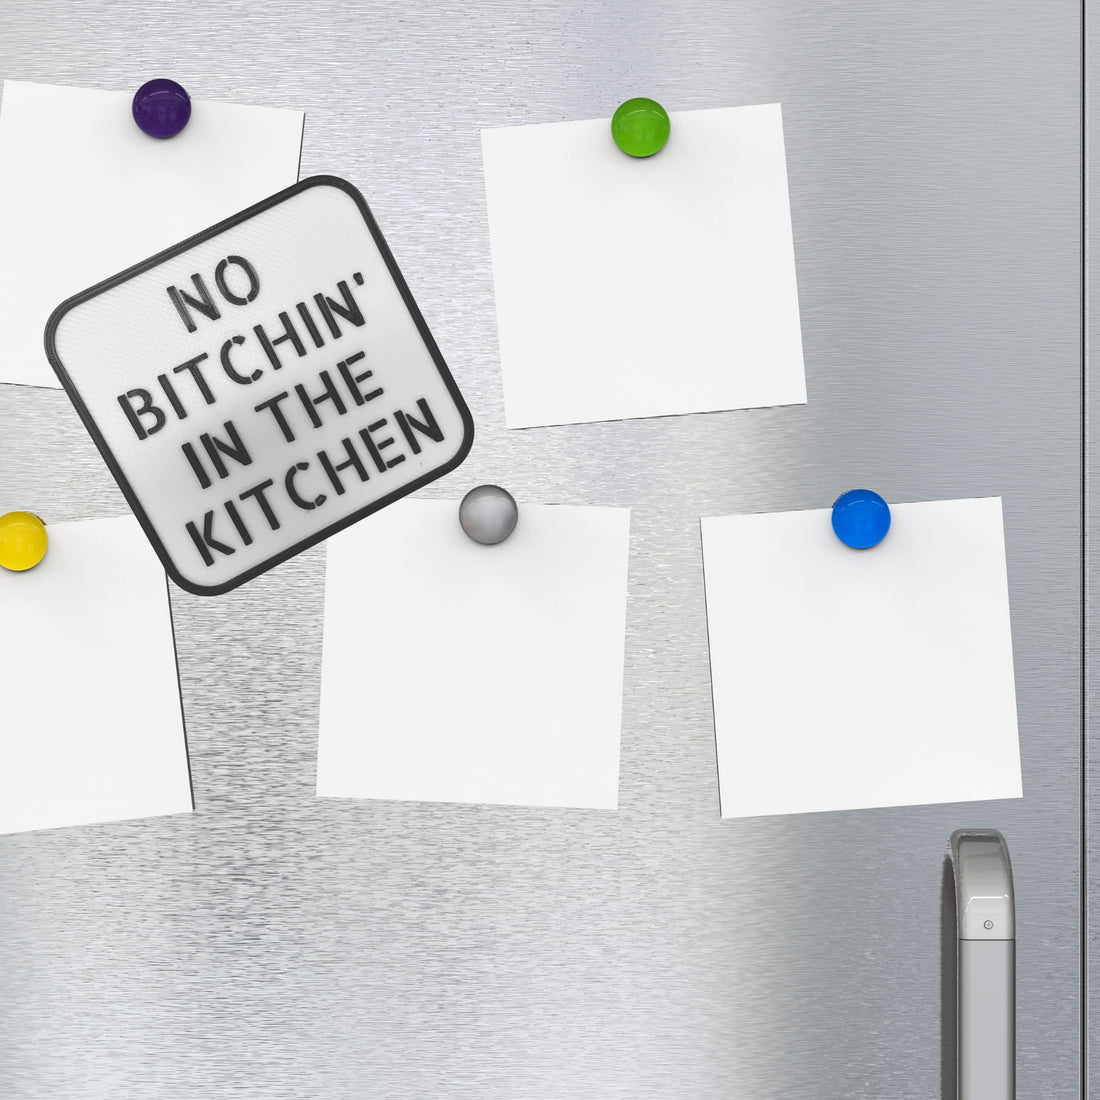 Funny Fridge Magnet Sayings | Improve Your Productivity in The Kitchen | Made in The USA!